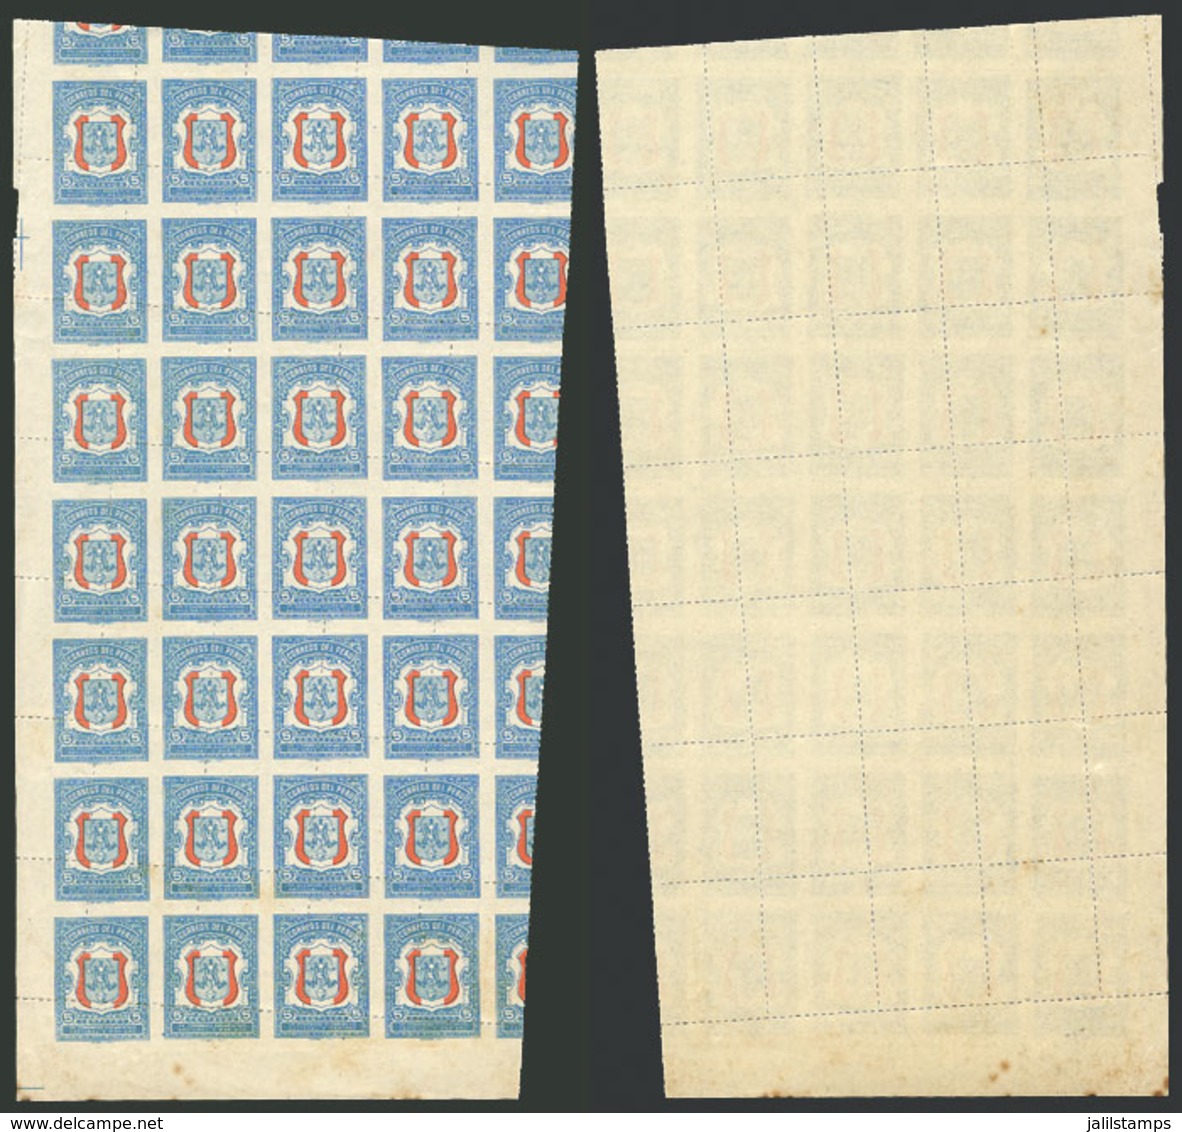 PERU: Sc.RA34, 1954 Postal Tax Of 5c. To Collect Funds For The Eucharistic Congress, Block Of 30 With DIAGONAL PERFORATI - Pérou